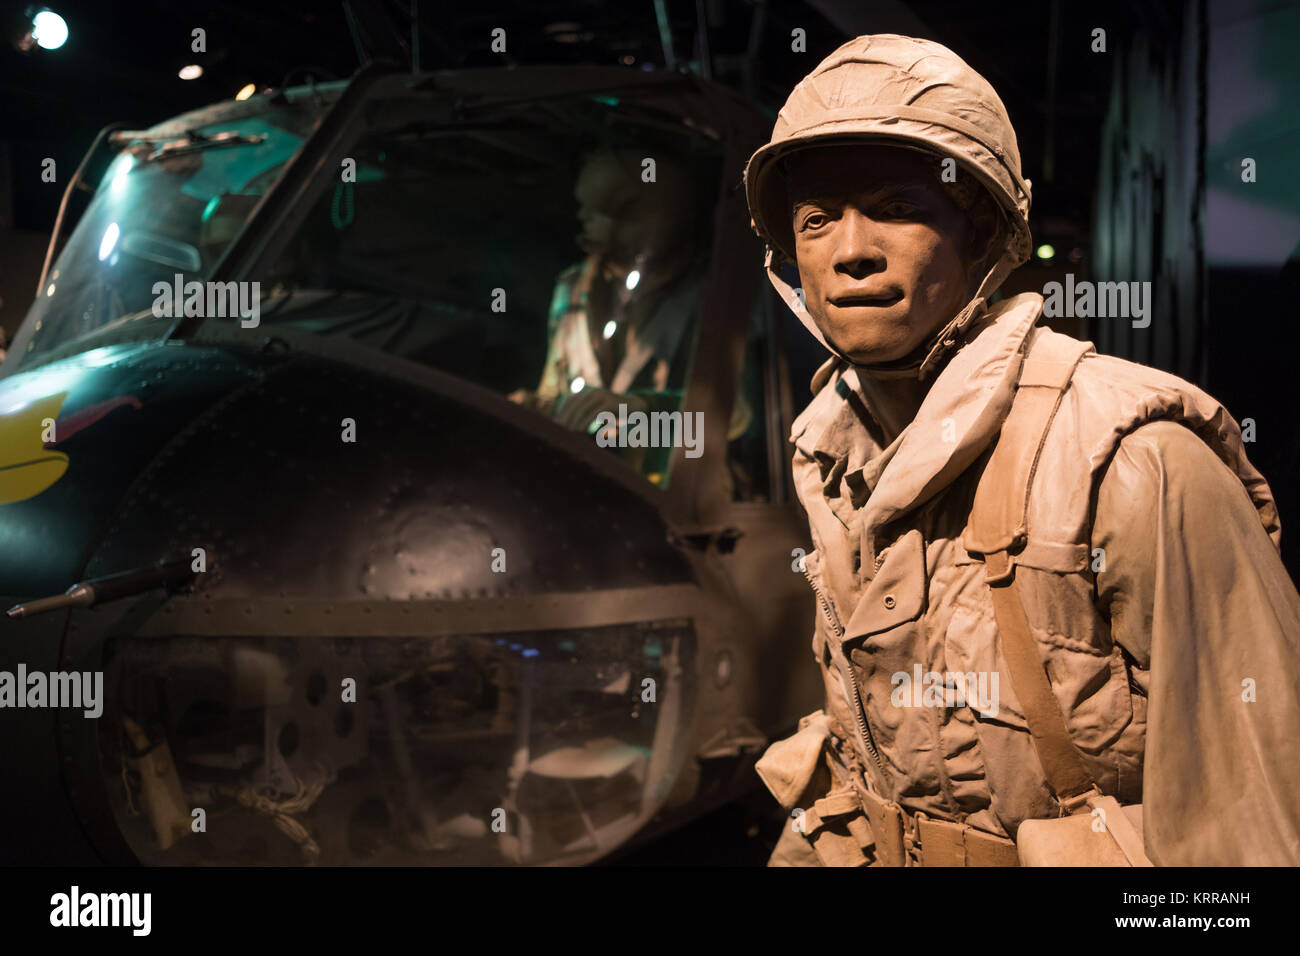 An exhibit focusing on the Vietnam War at the Smithsonian National Museum of American History in Washington DC. Stock Photo